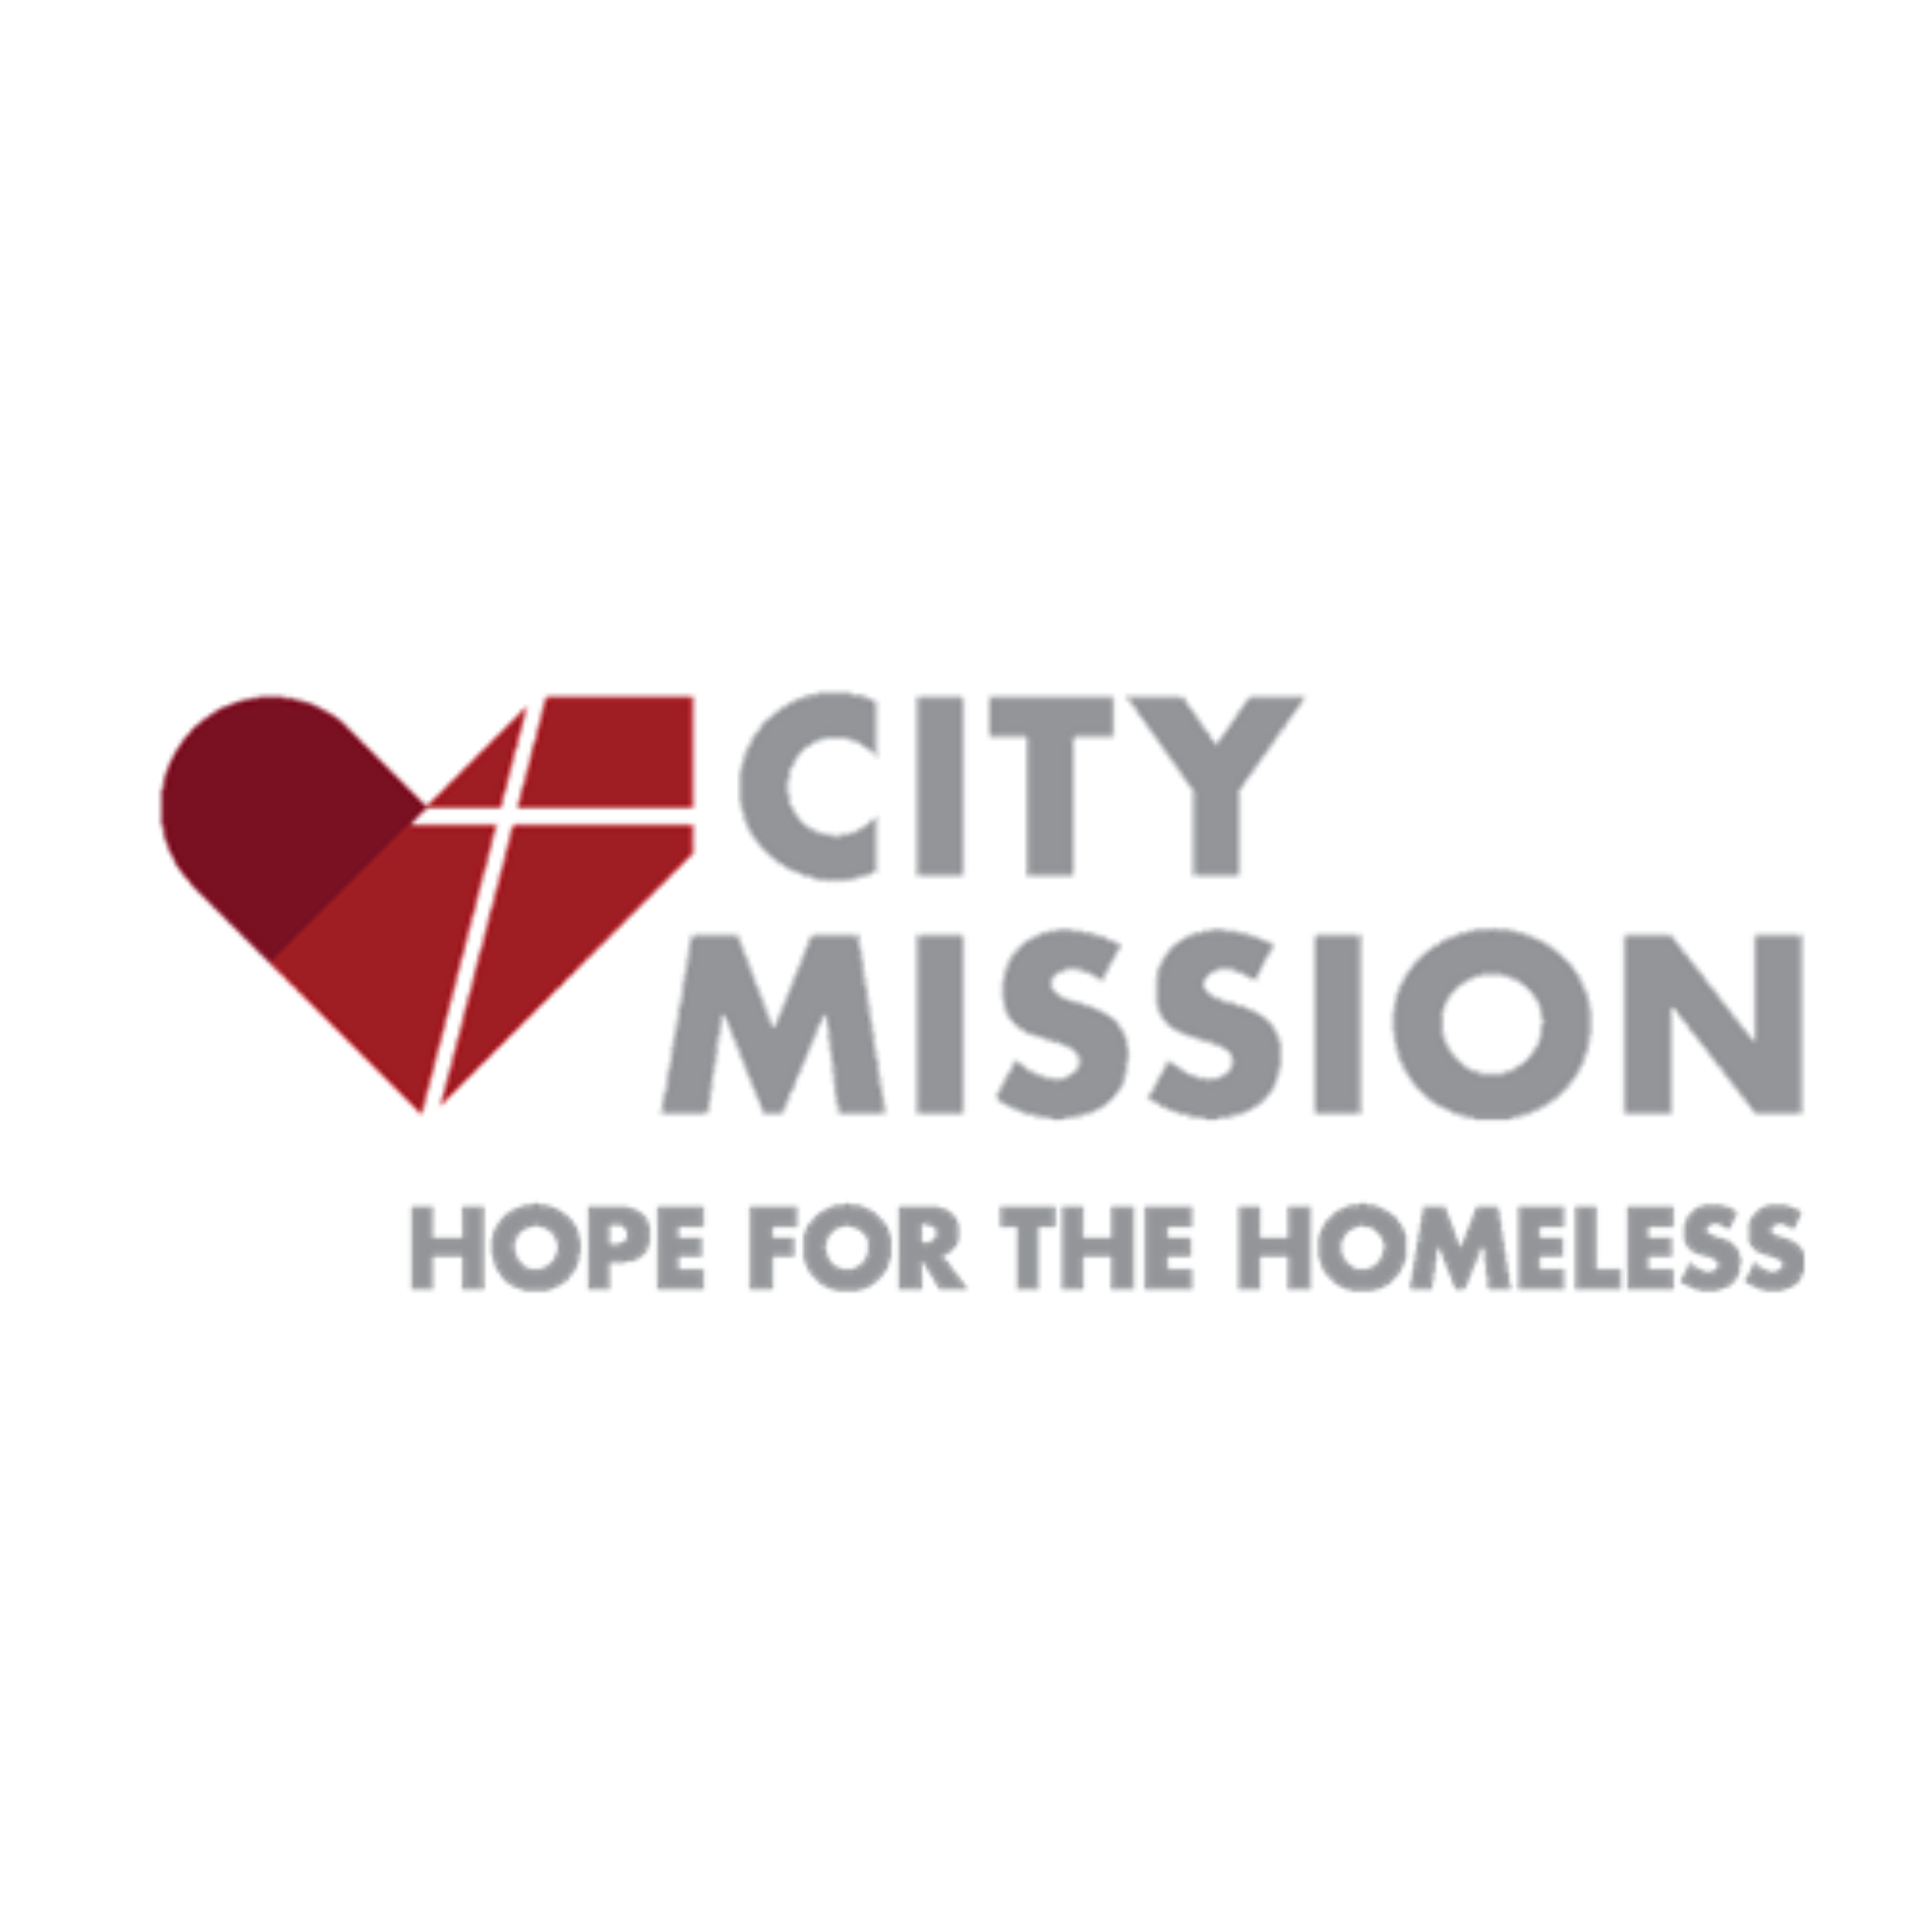 City Mission's - Hope for the Homeless